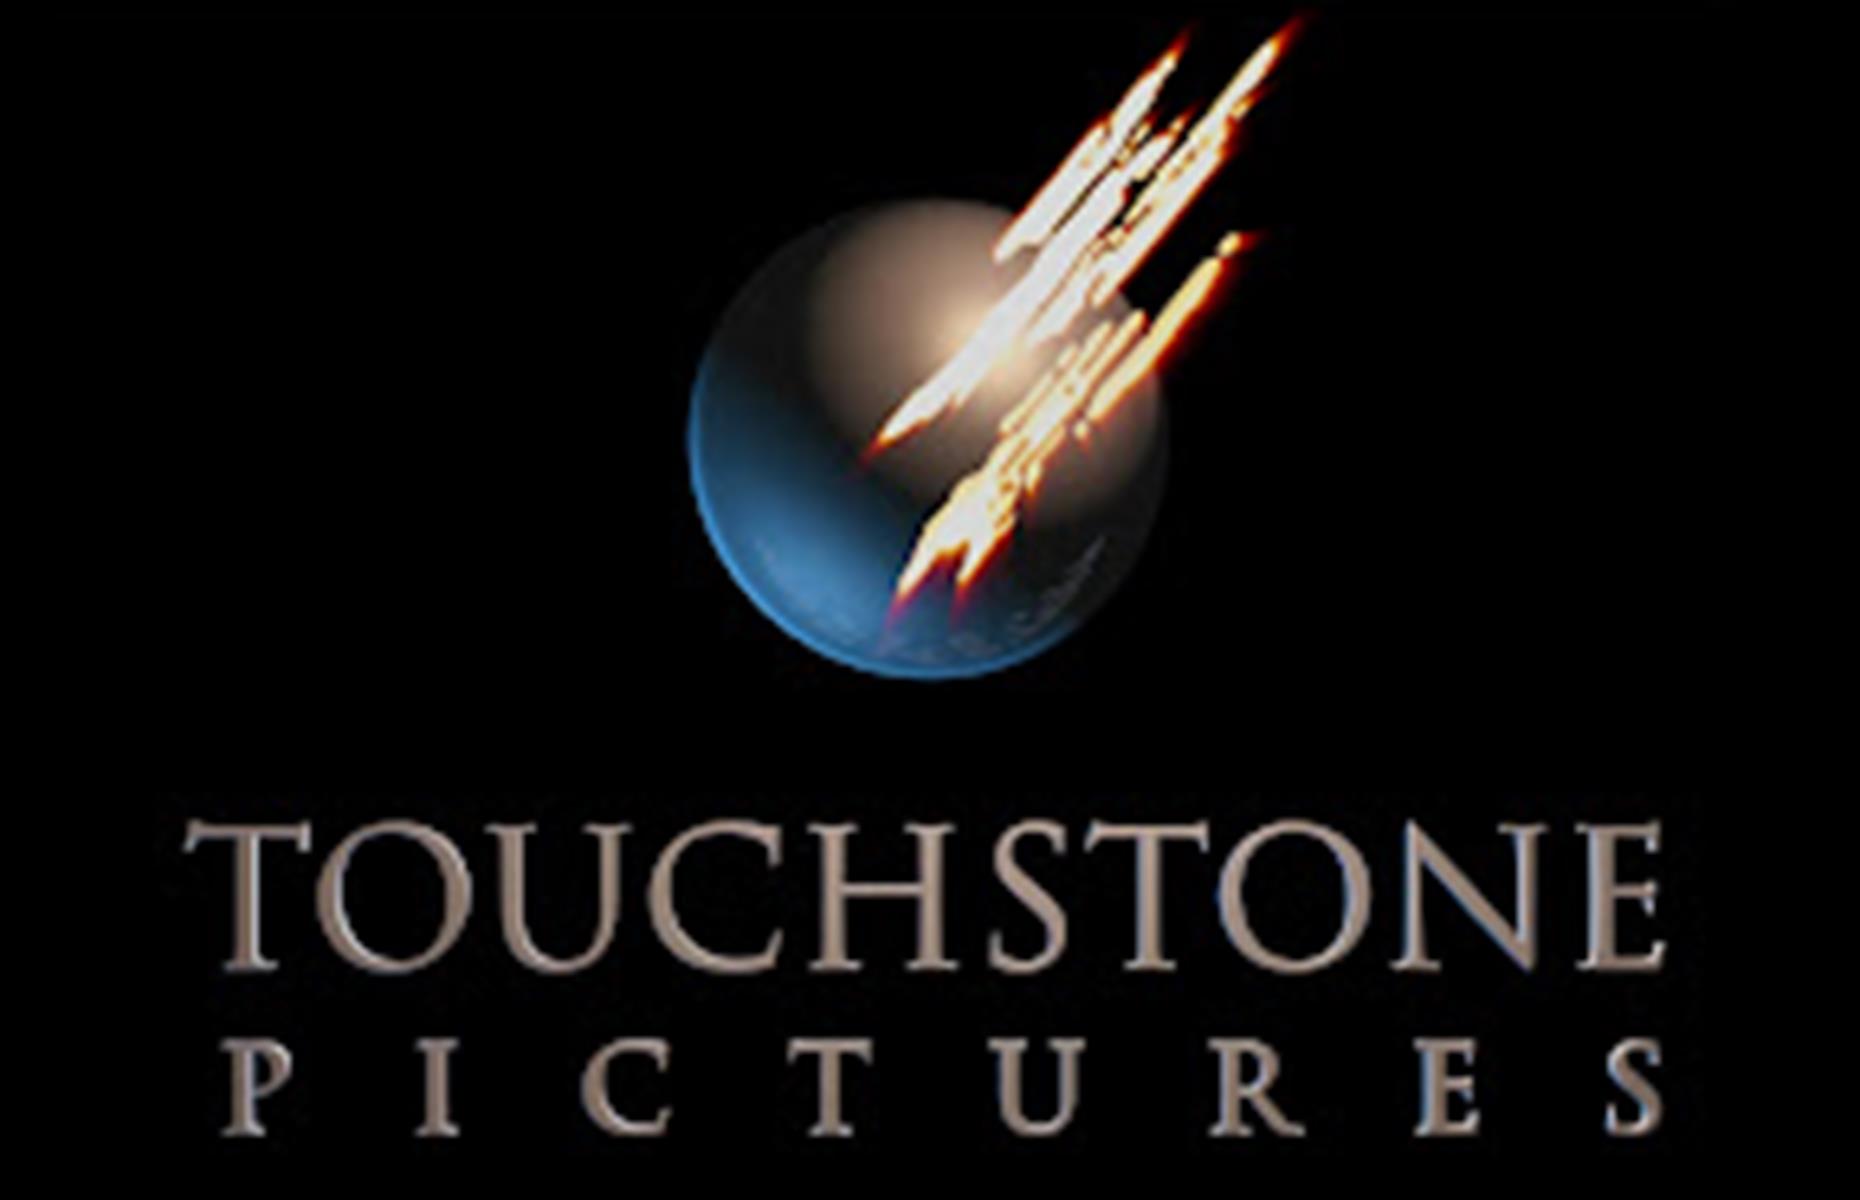 Touchstone Pictures helped Disney reach new audiences